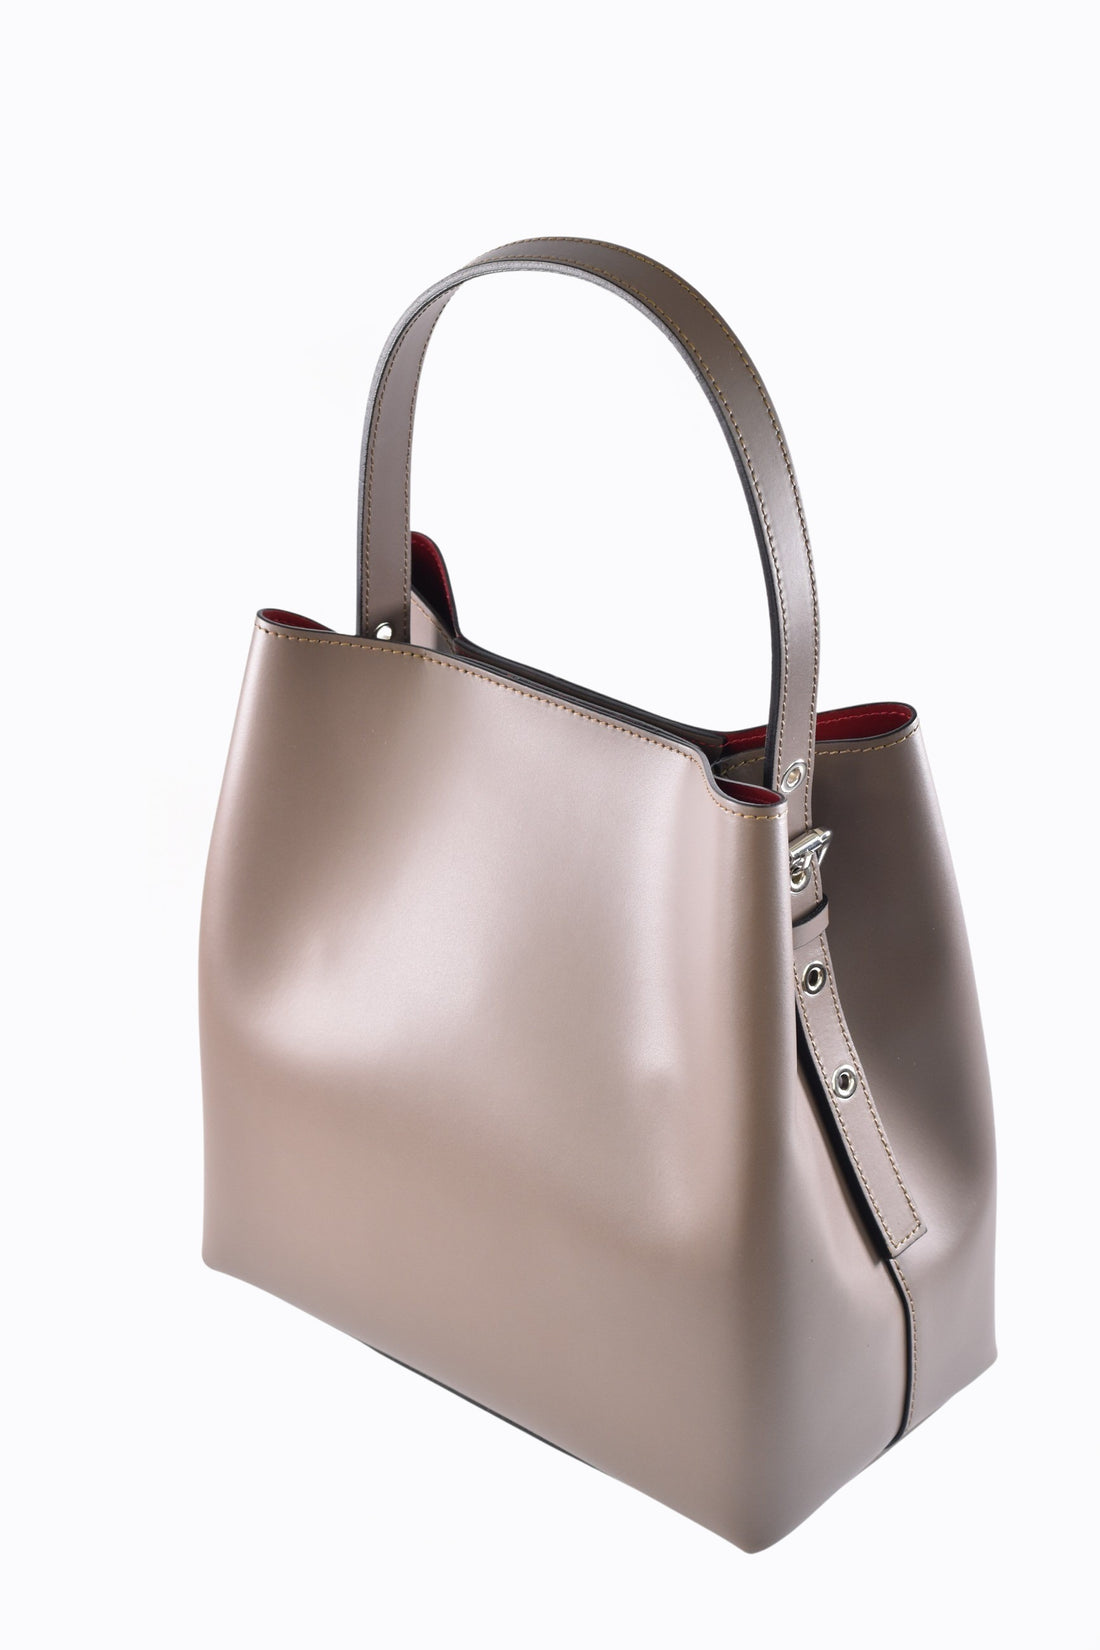 Melany bag in Taupe brushed leather